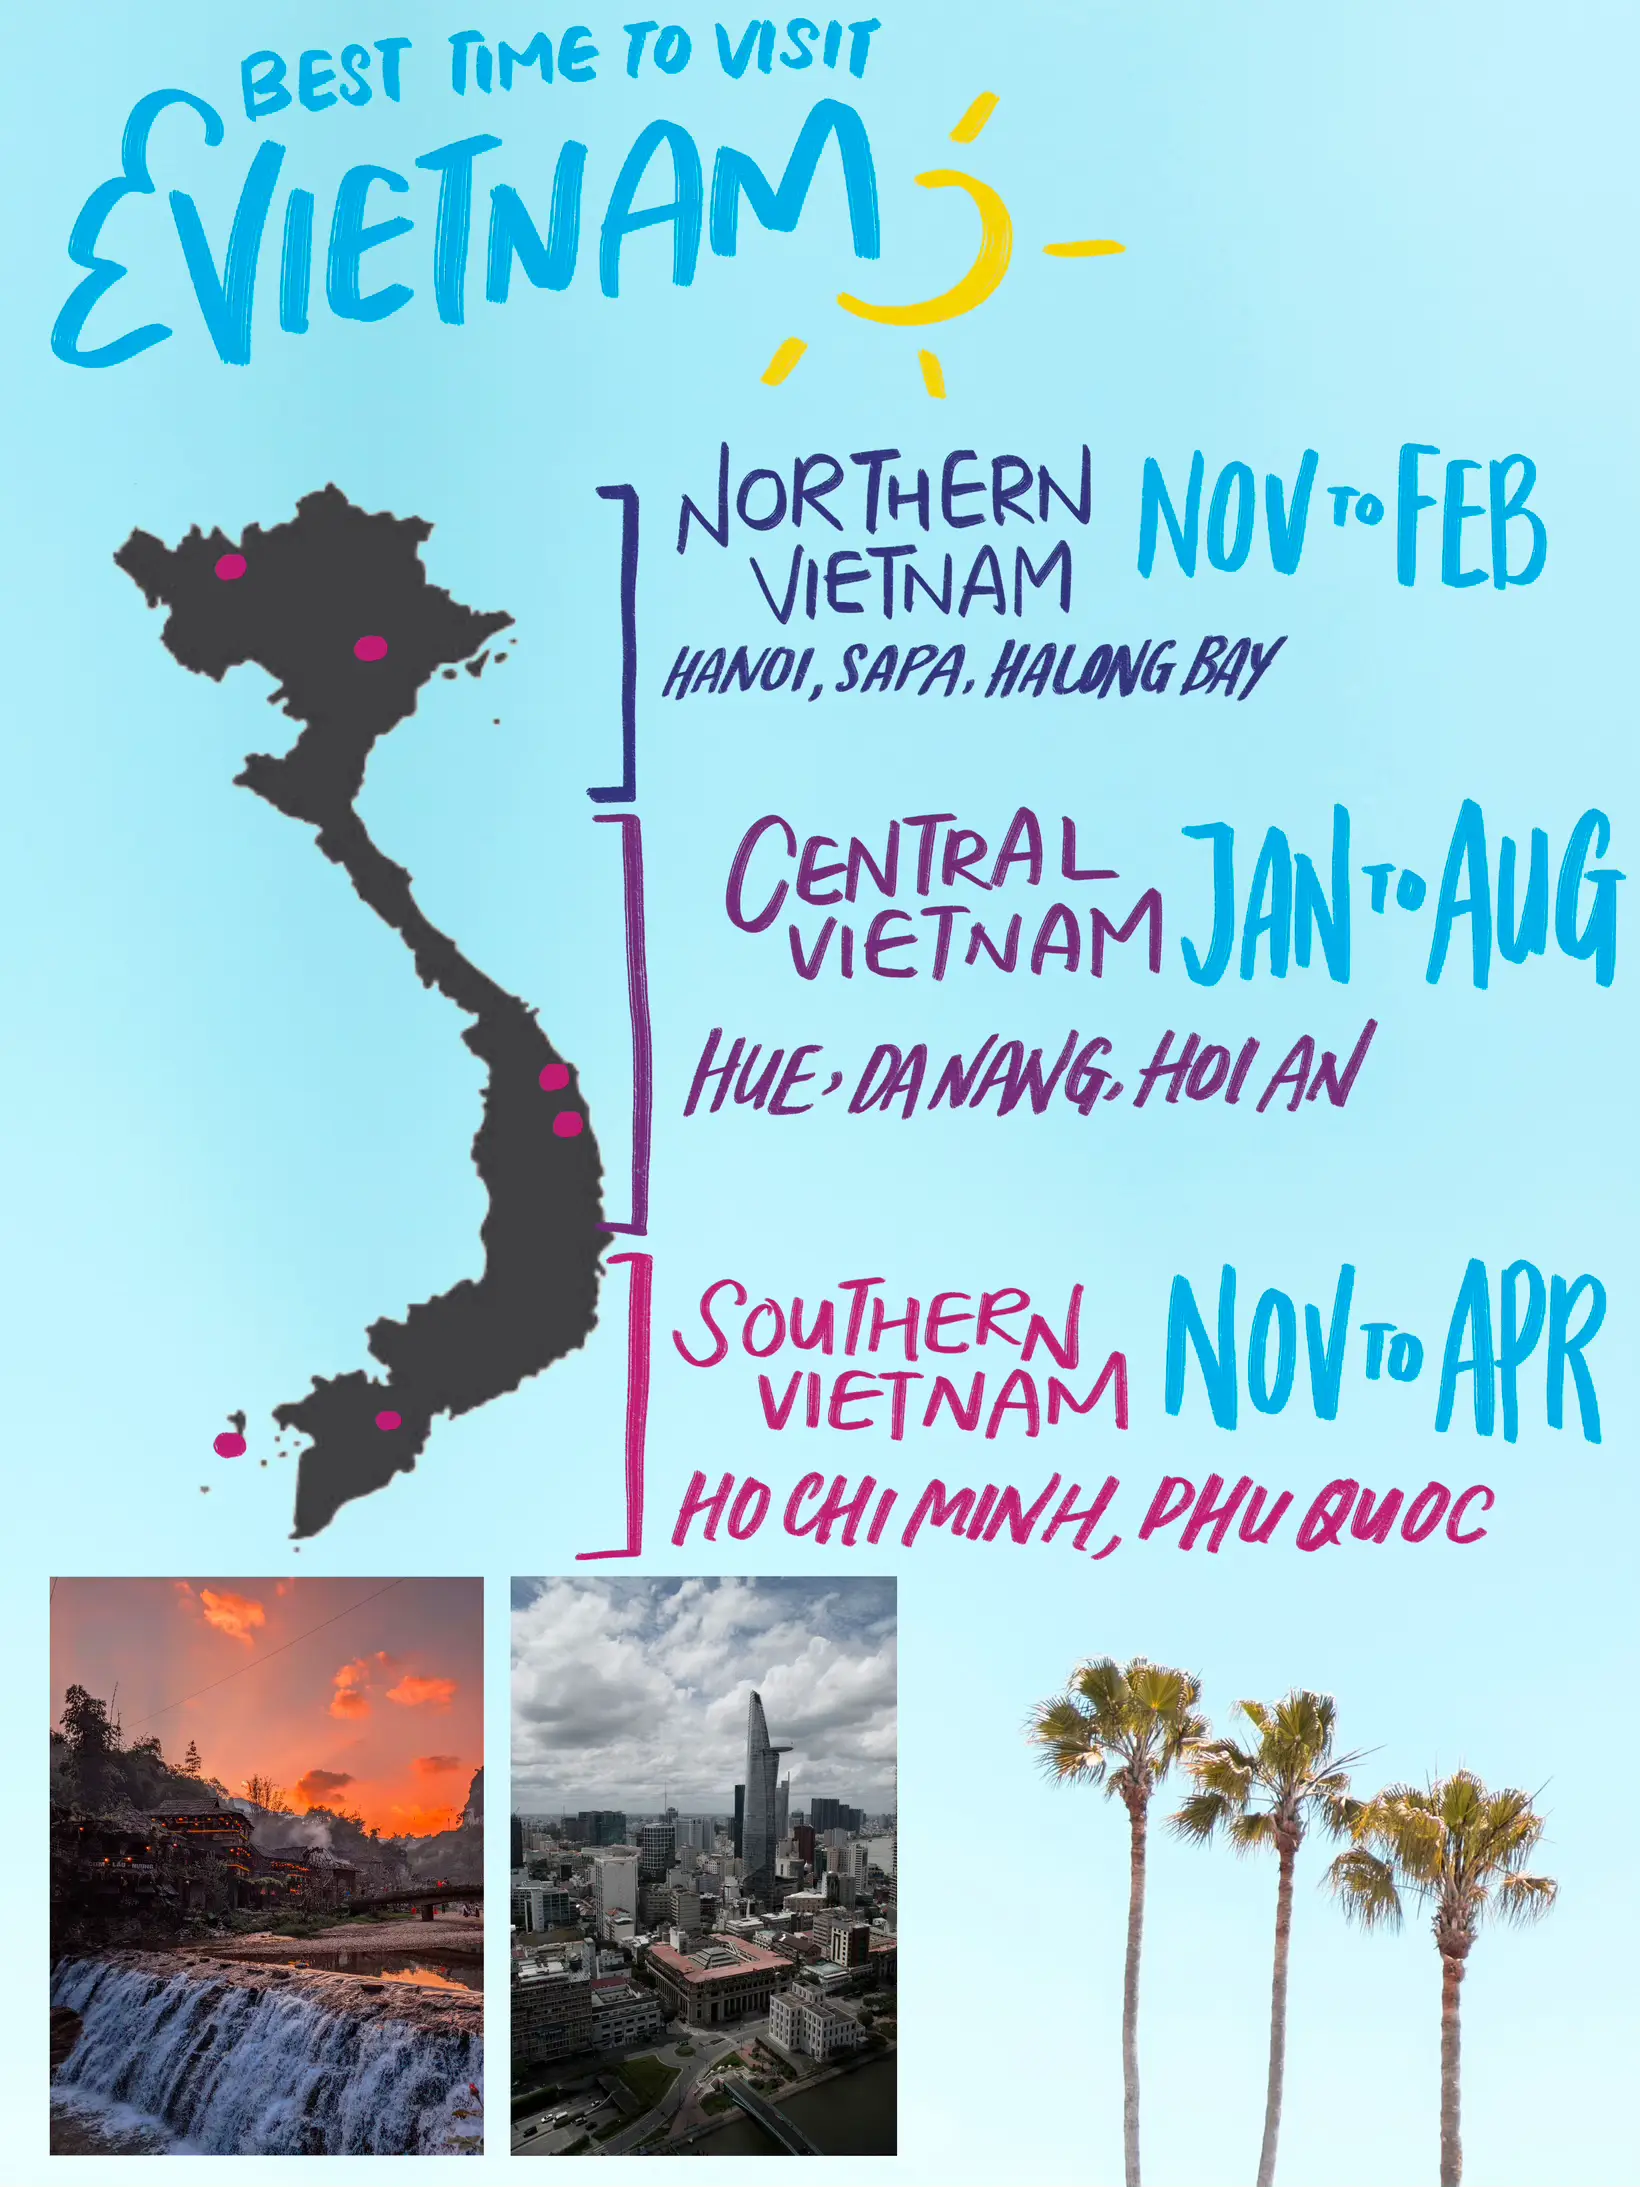 ASIA TRAVEL: WHERE AND WHEN TO TRAVEL THIS YEAR ☀️'s images(2)